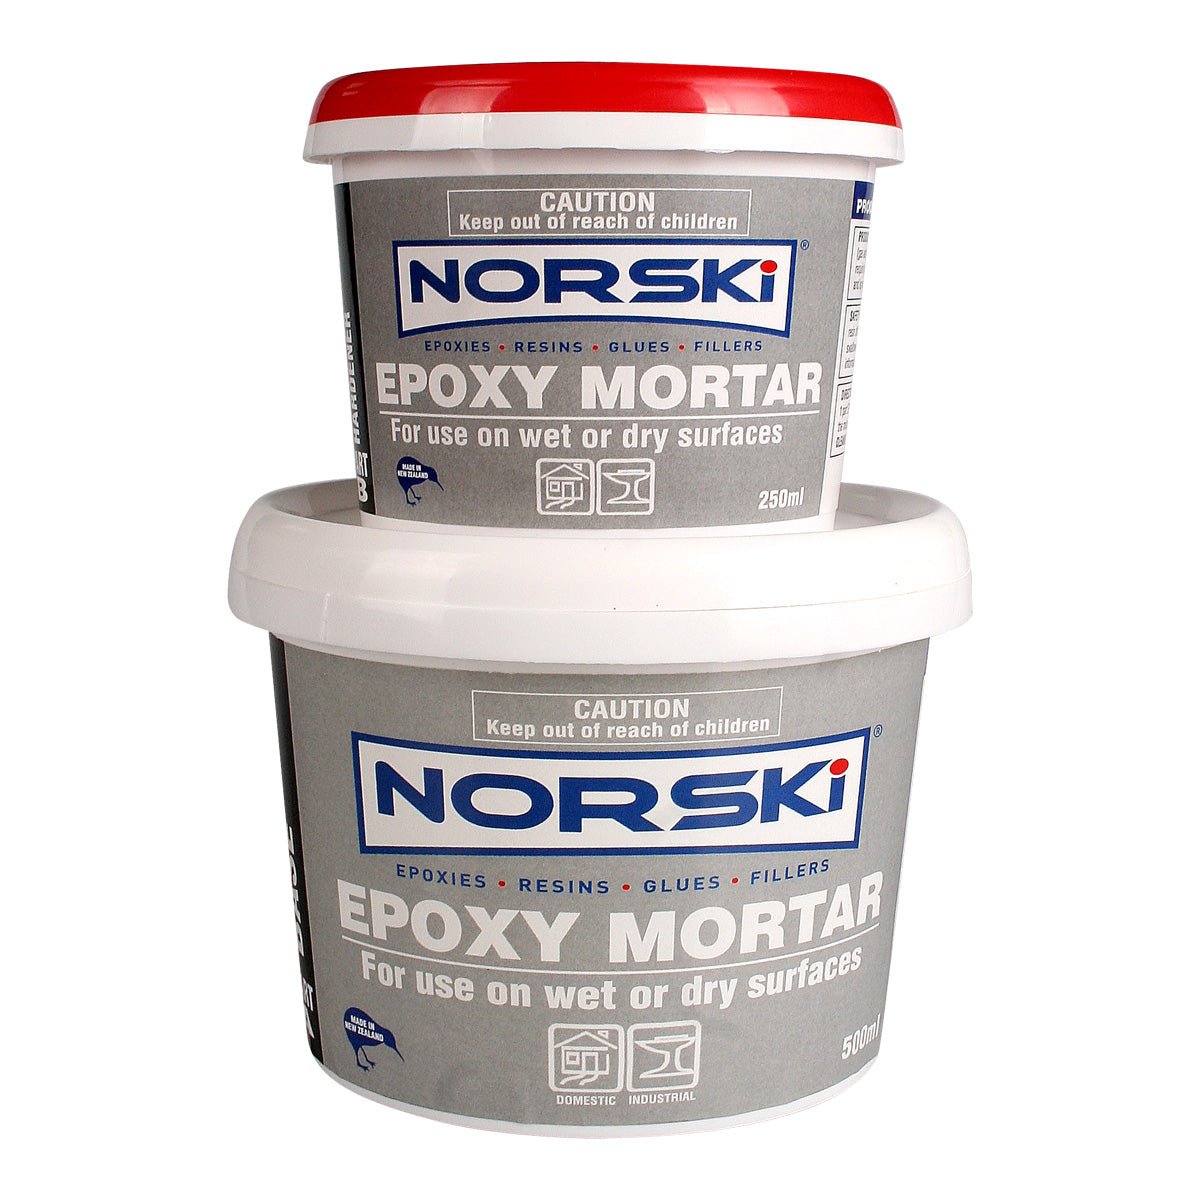 Norski Epoxy Mortar (Mixed by 2:1)